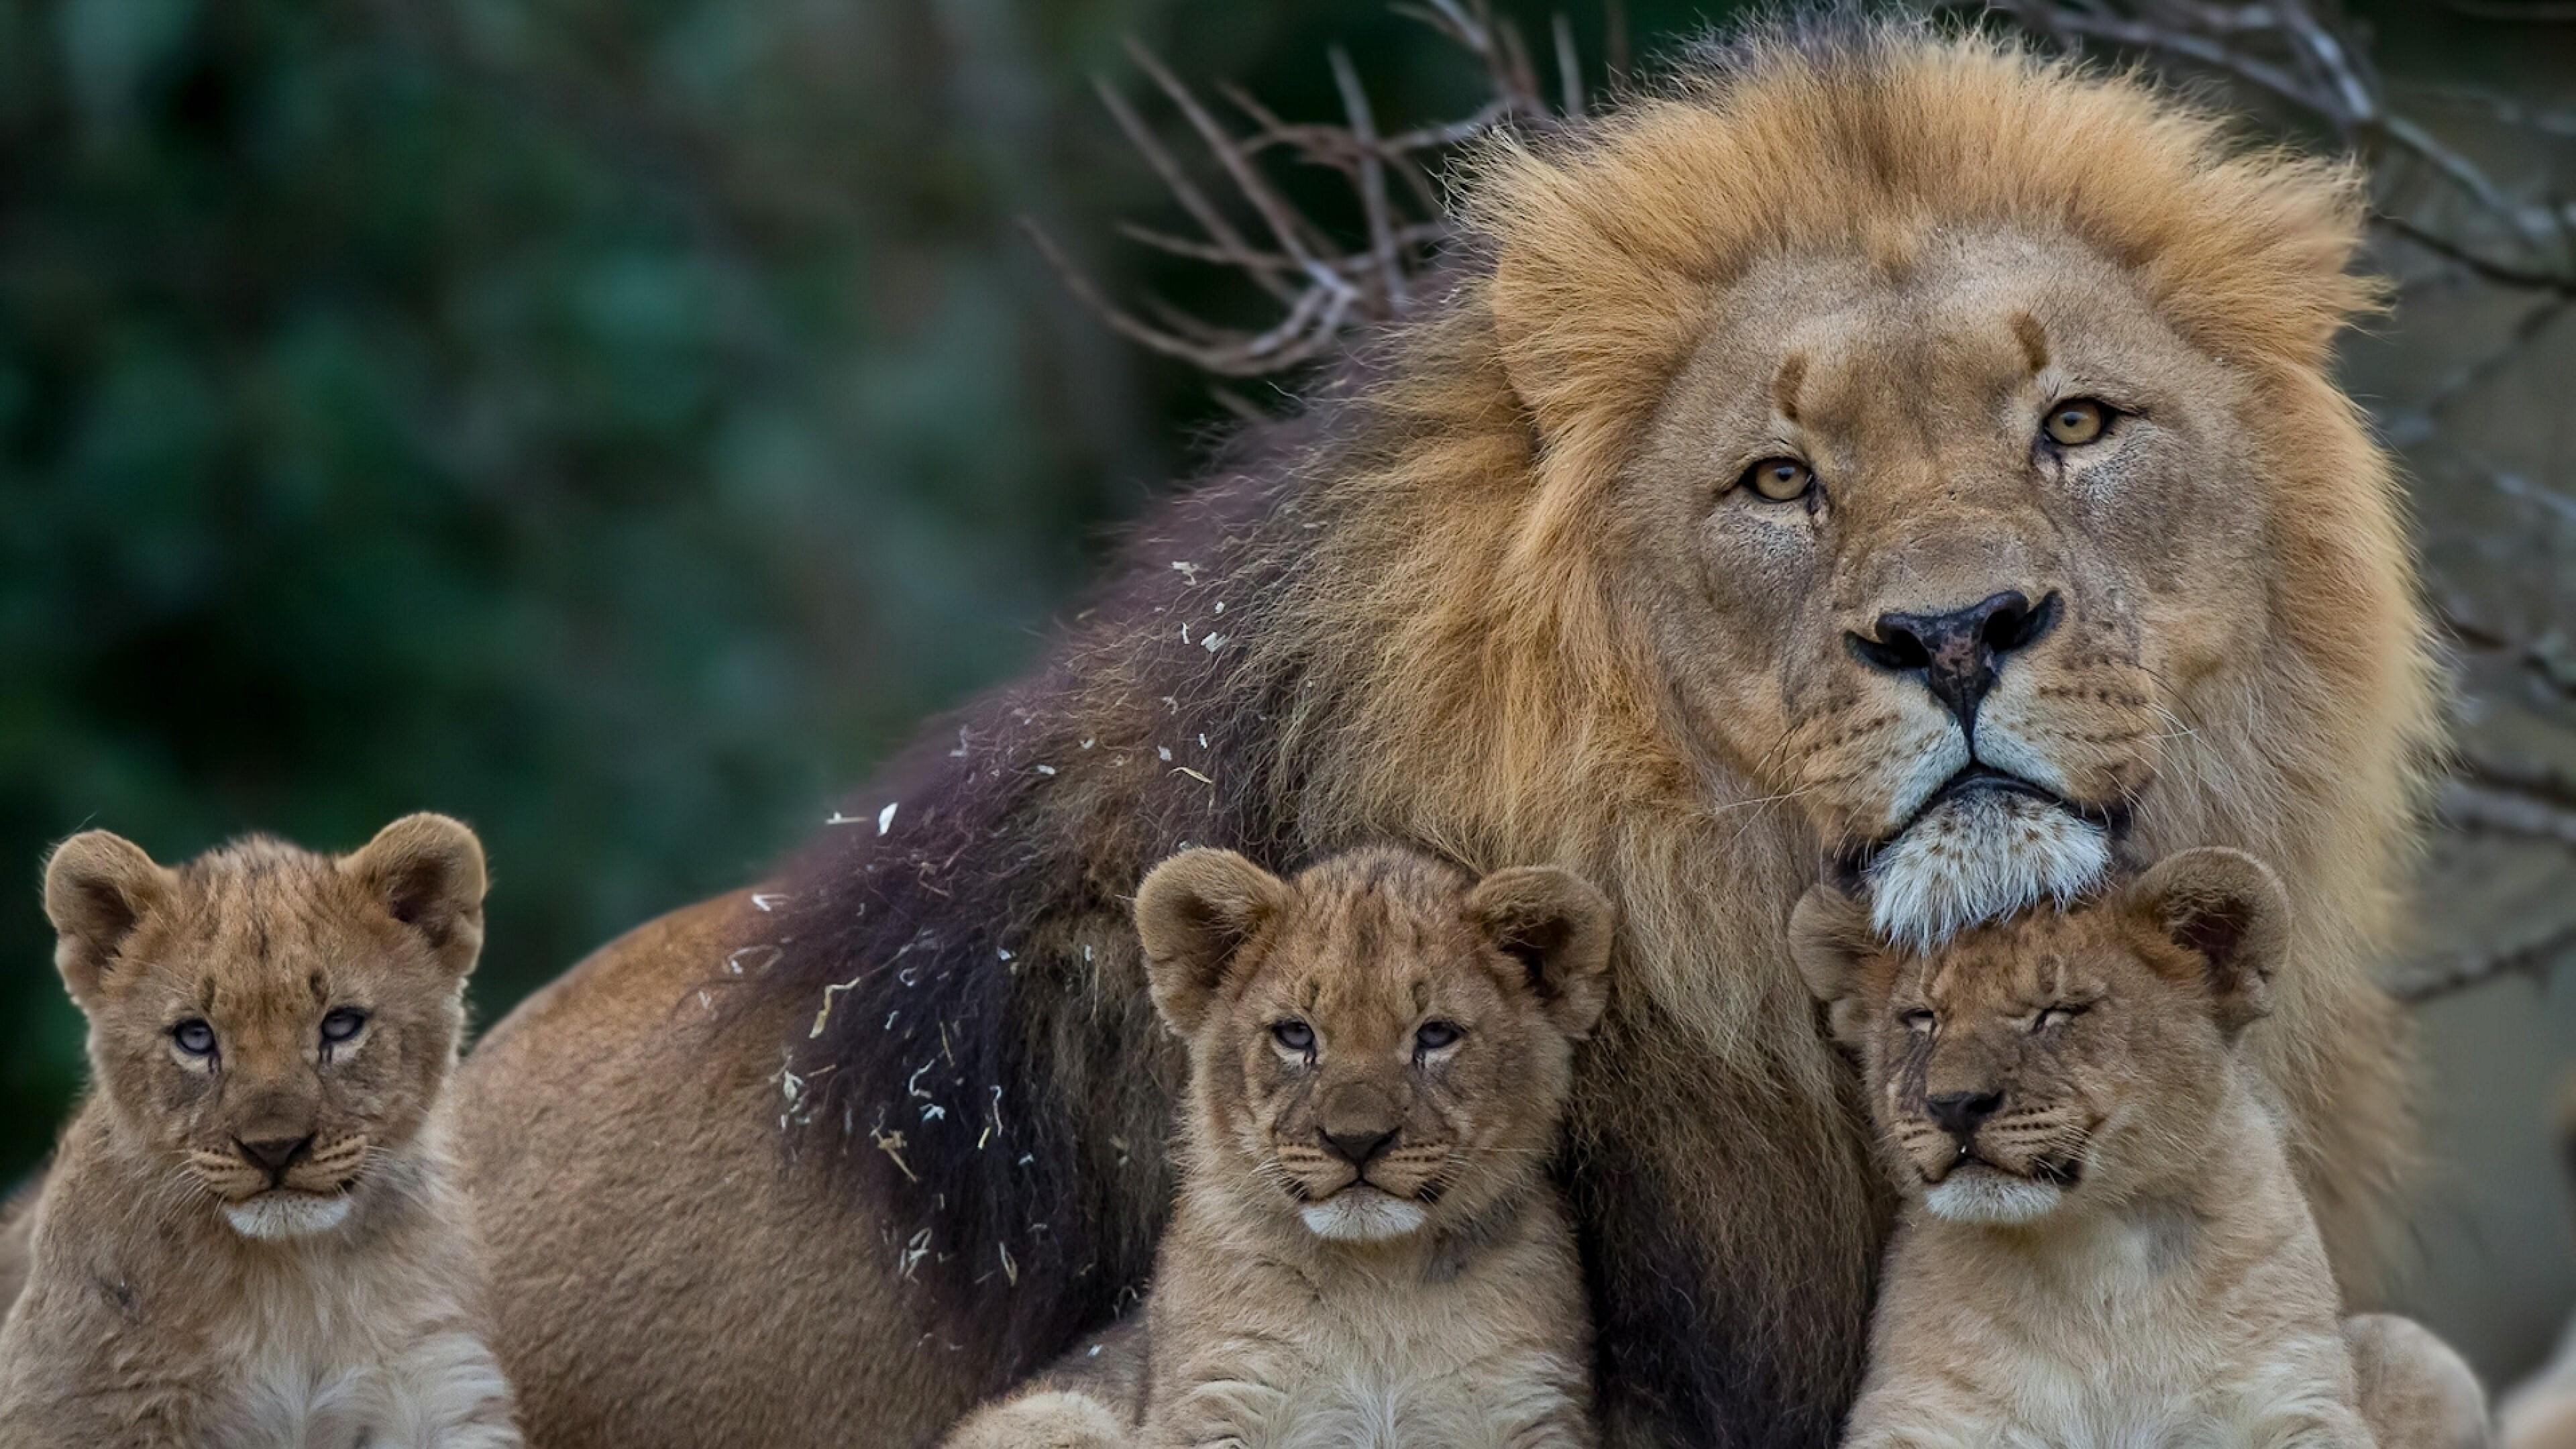 3840 x 2160 · jpeg - Big Lion with Cub HD Wallpaper Background | HD Wallpapers